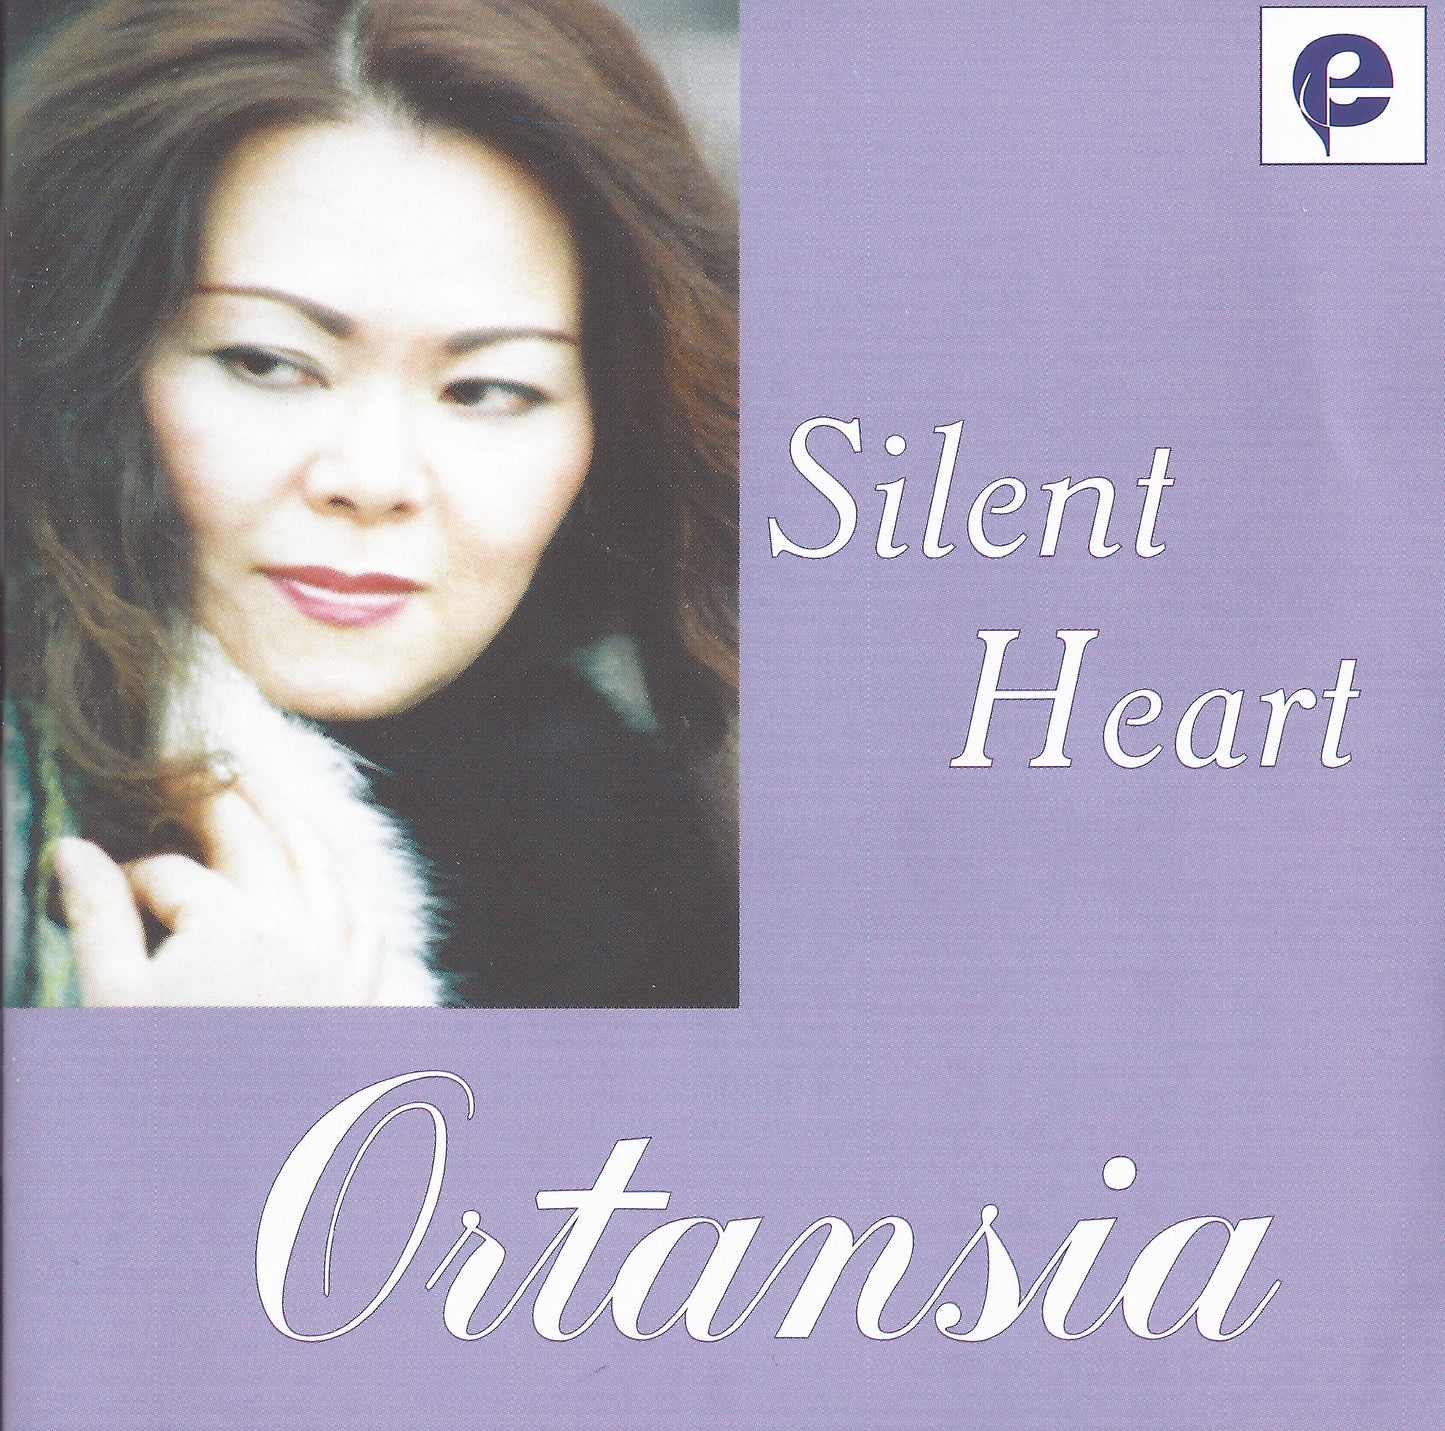 Silent Heart - Ortansia